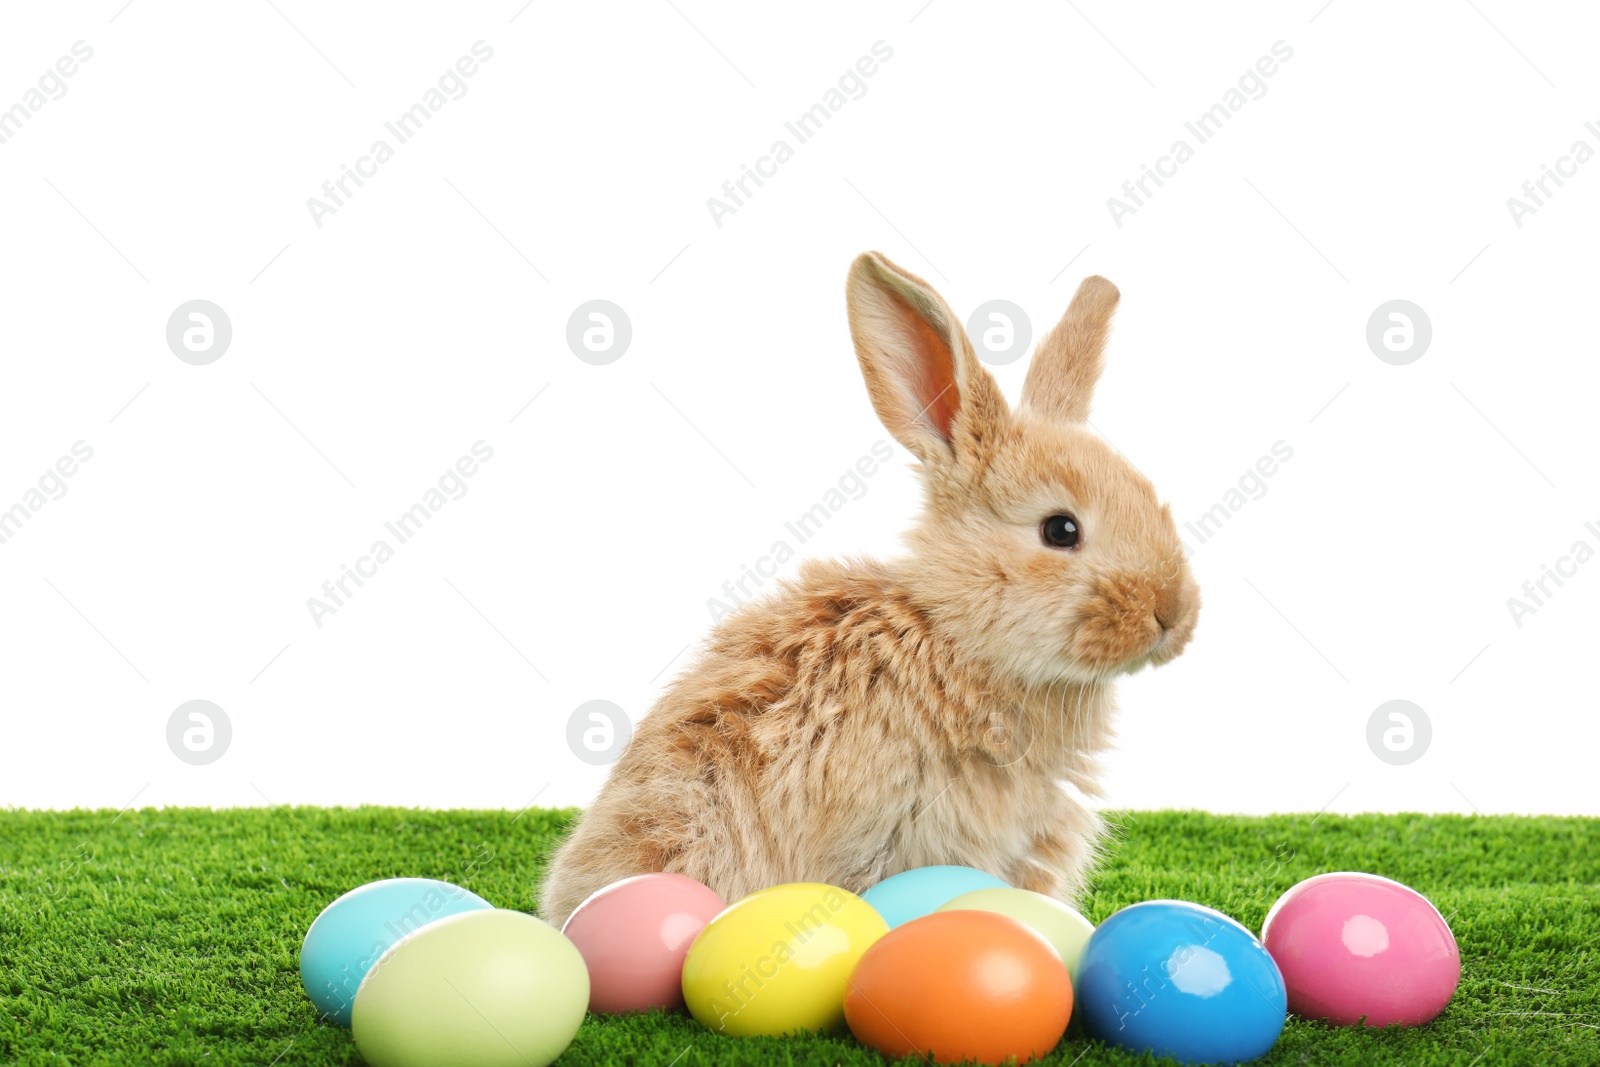 Photo of Adorable furry Easter bunny and dyed eggs on green grass against white background